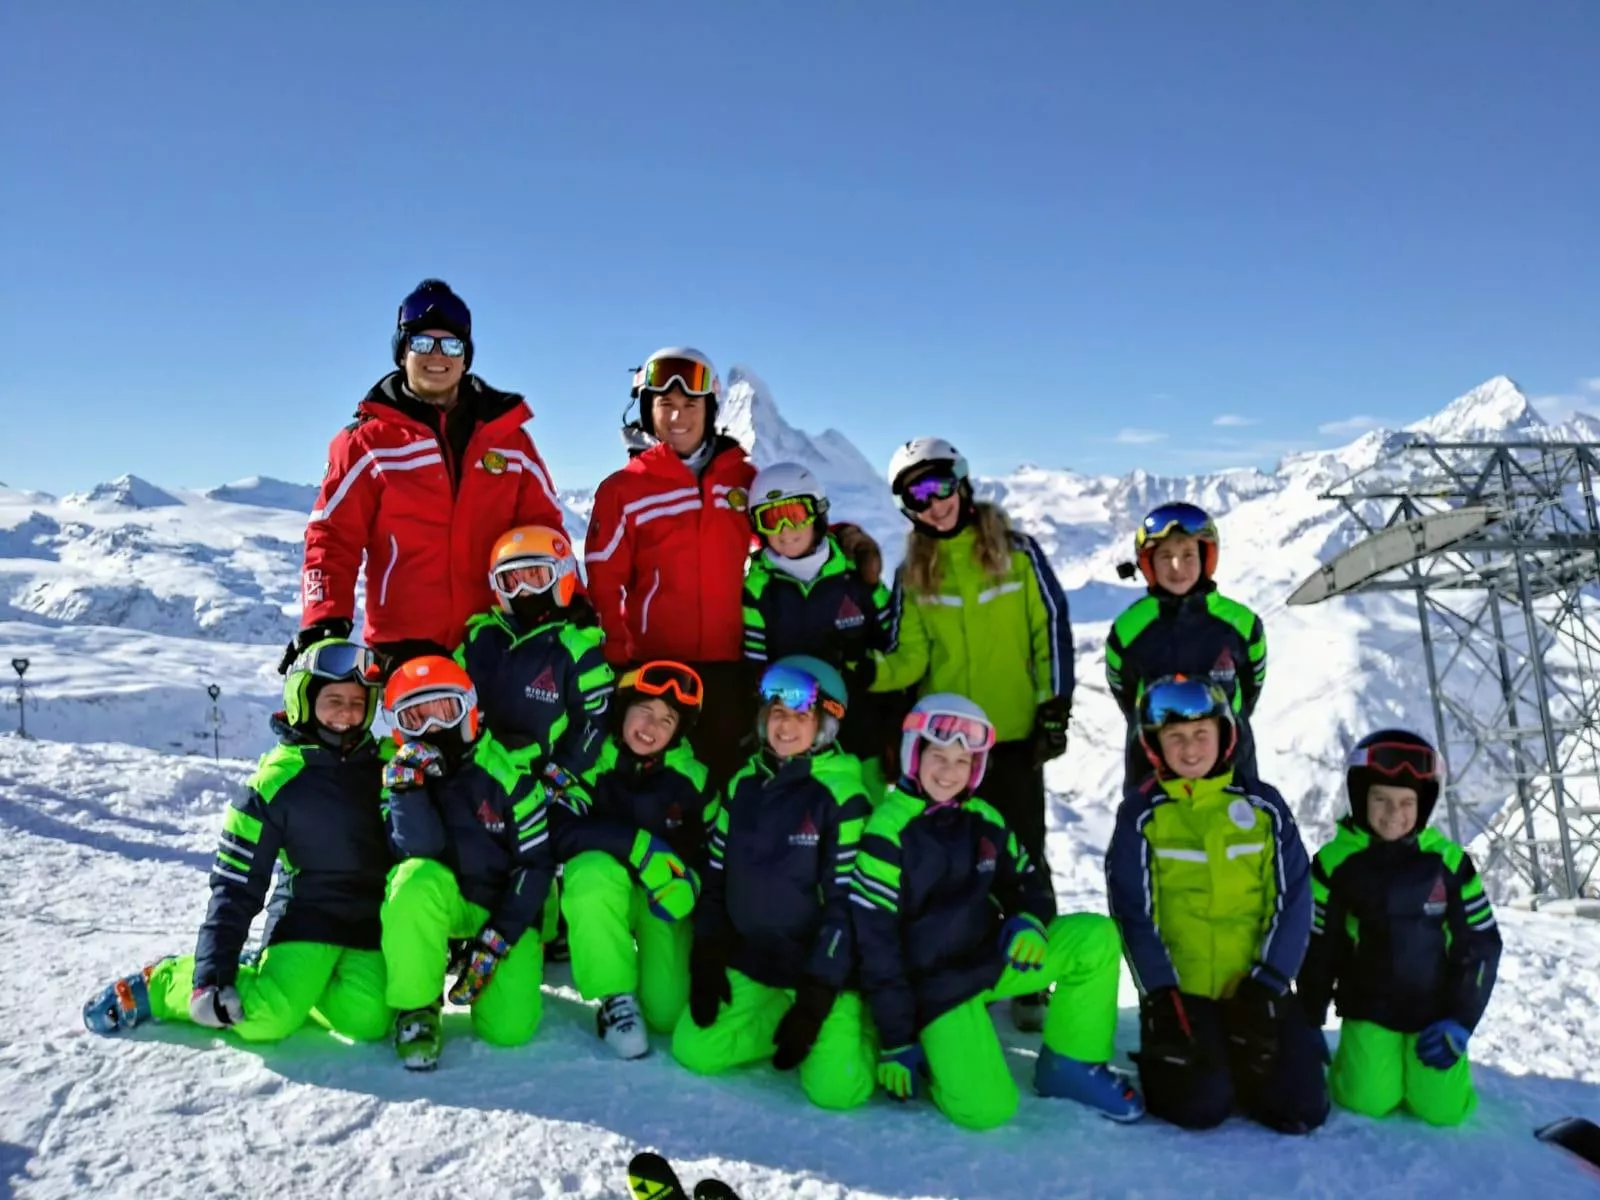 Ride’em Ski School in Italy, Europe | Snowboarding,Skiing - Rated 0.8